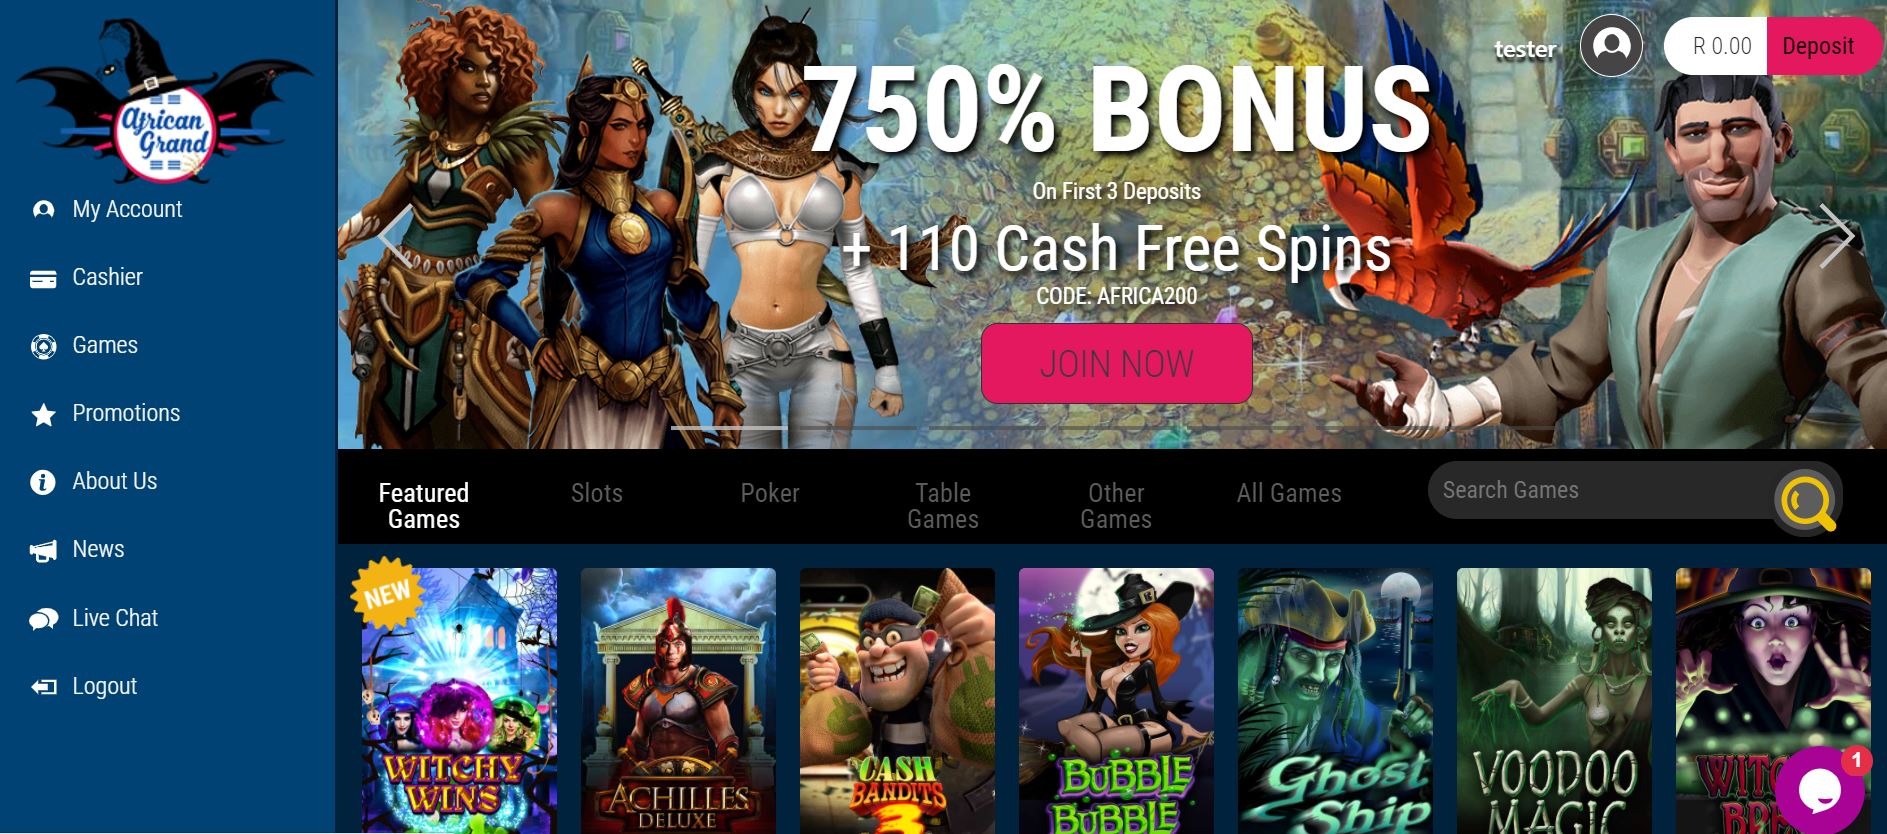 African Grand Casino 50 Free Spins